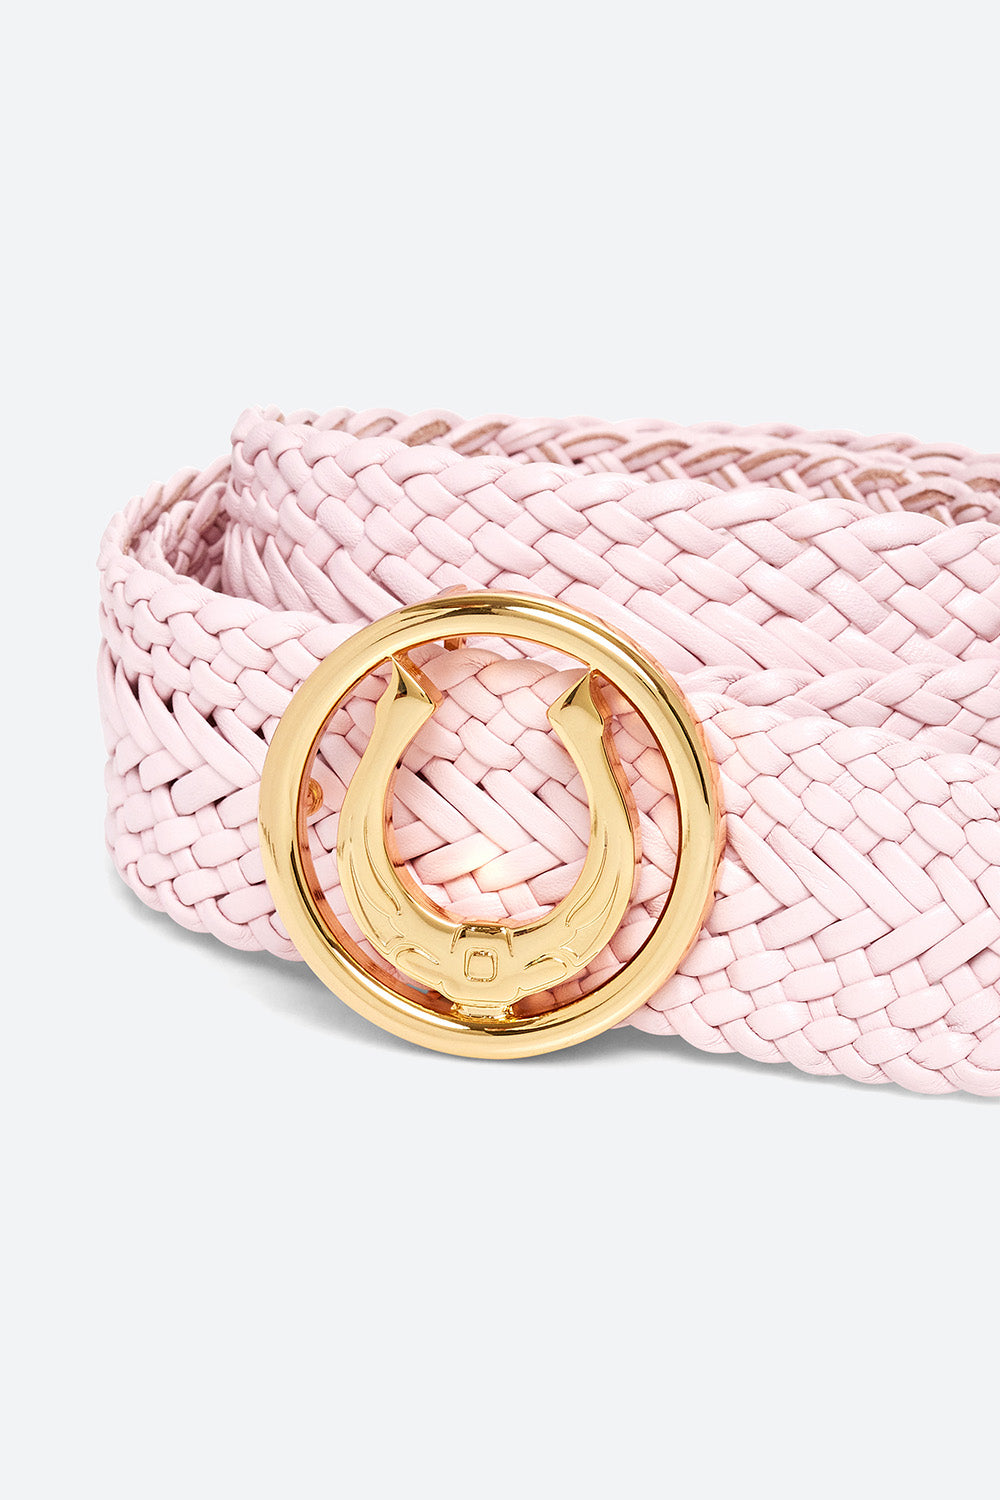 Women's Lucky Belt in Peony Pink, Polished Gold-toned Horseshoe Buckle